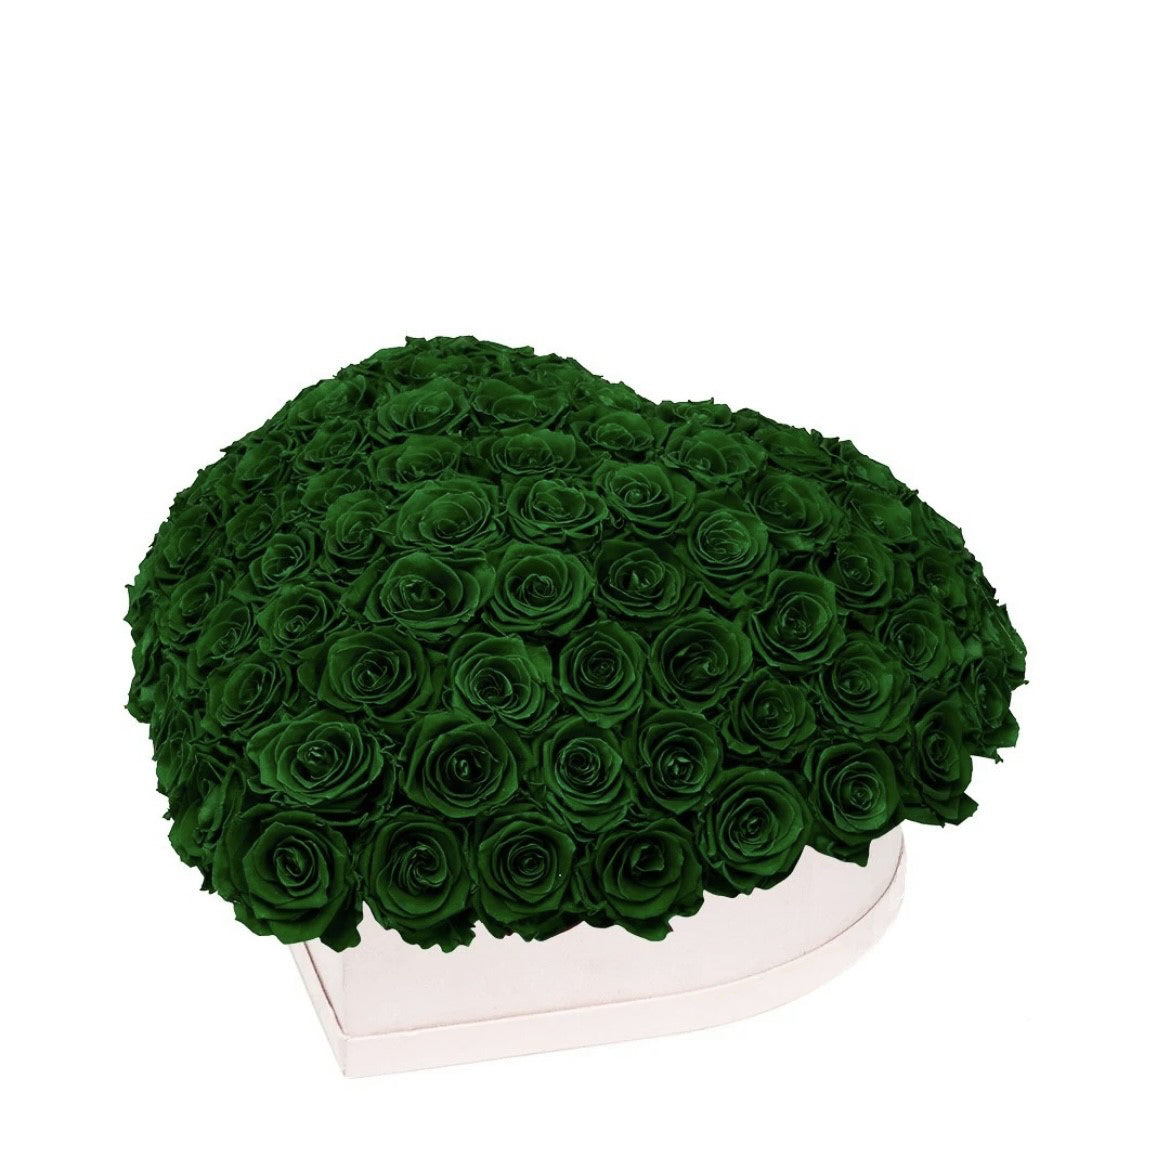 Green Roses - Love Heart "Crown"